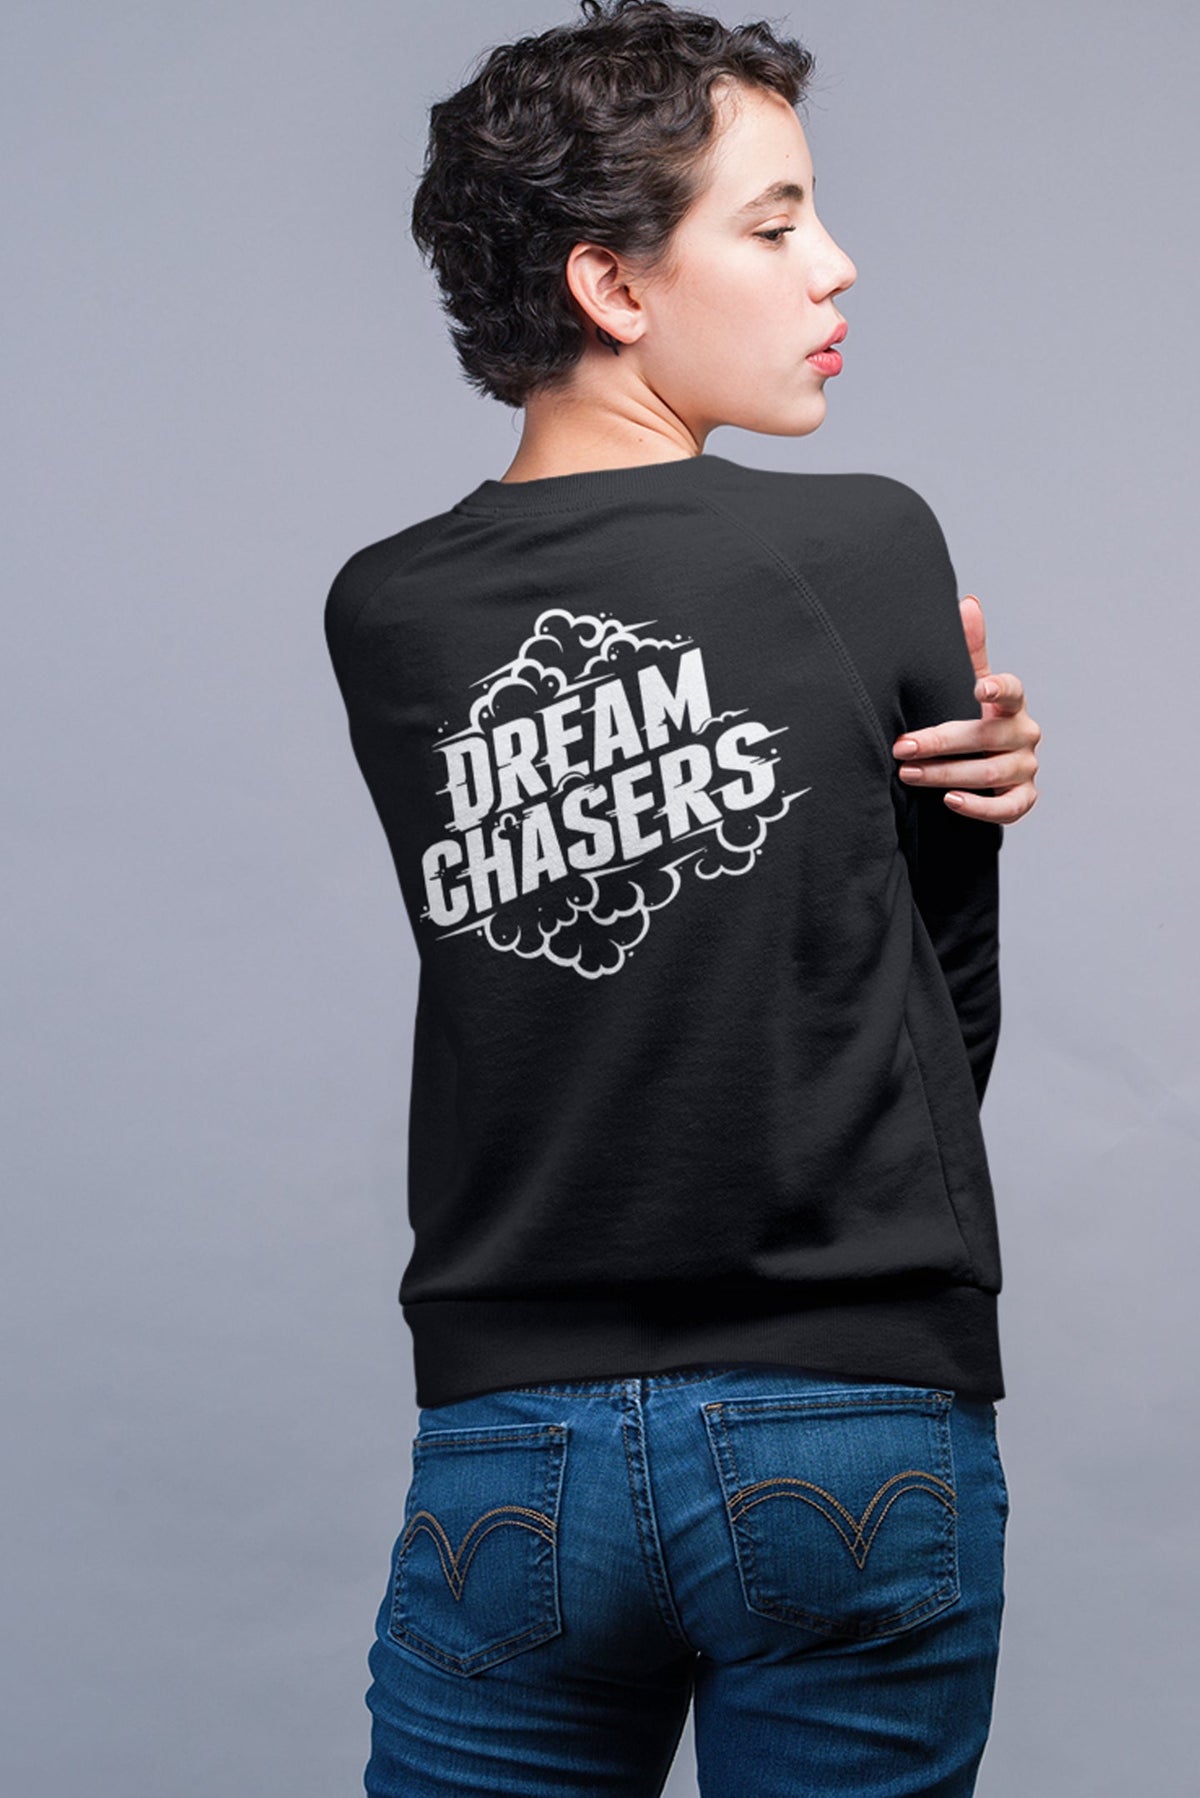 Dream Chaser Relaxed Fit Sweatshirt For Women